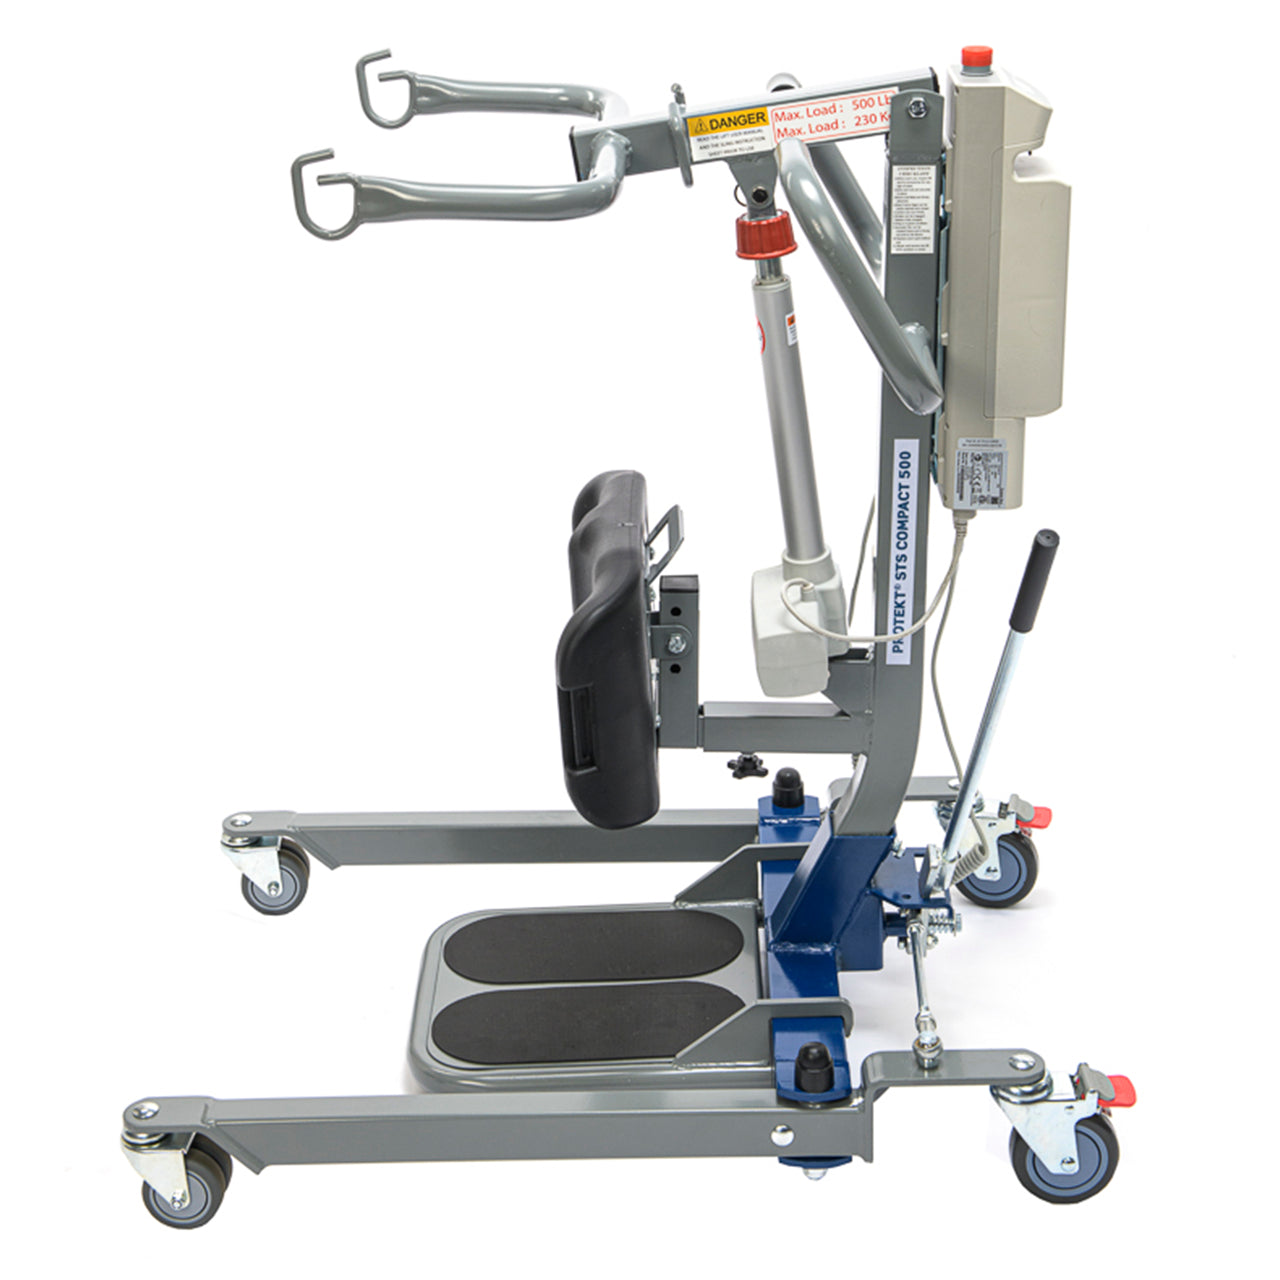 Proactive Medical Protekt STS Compact 500 Stand Assist Lift